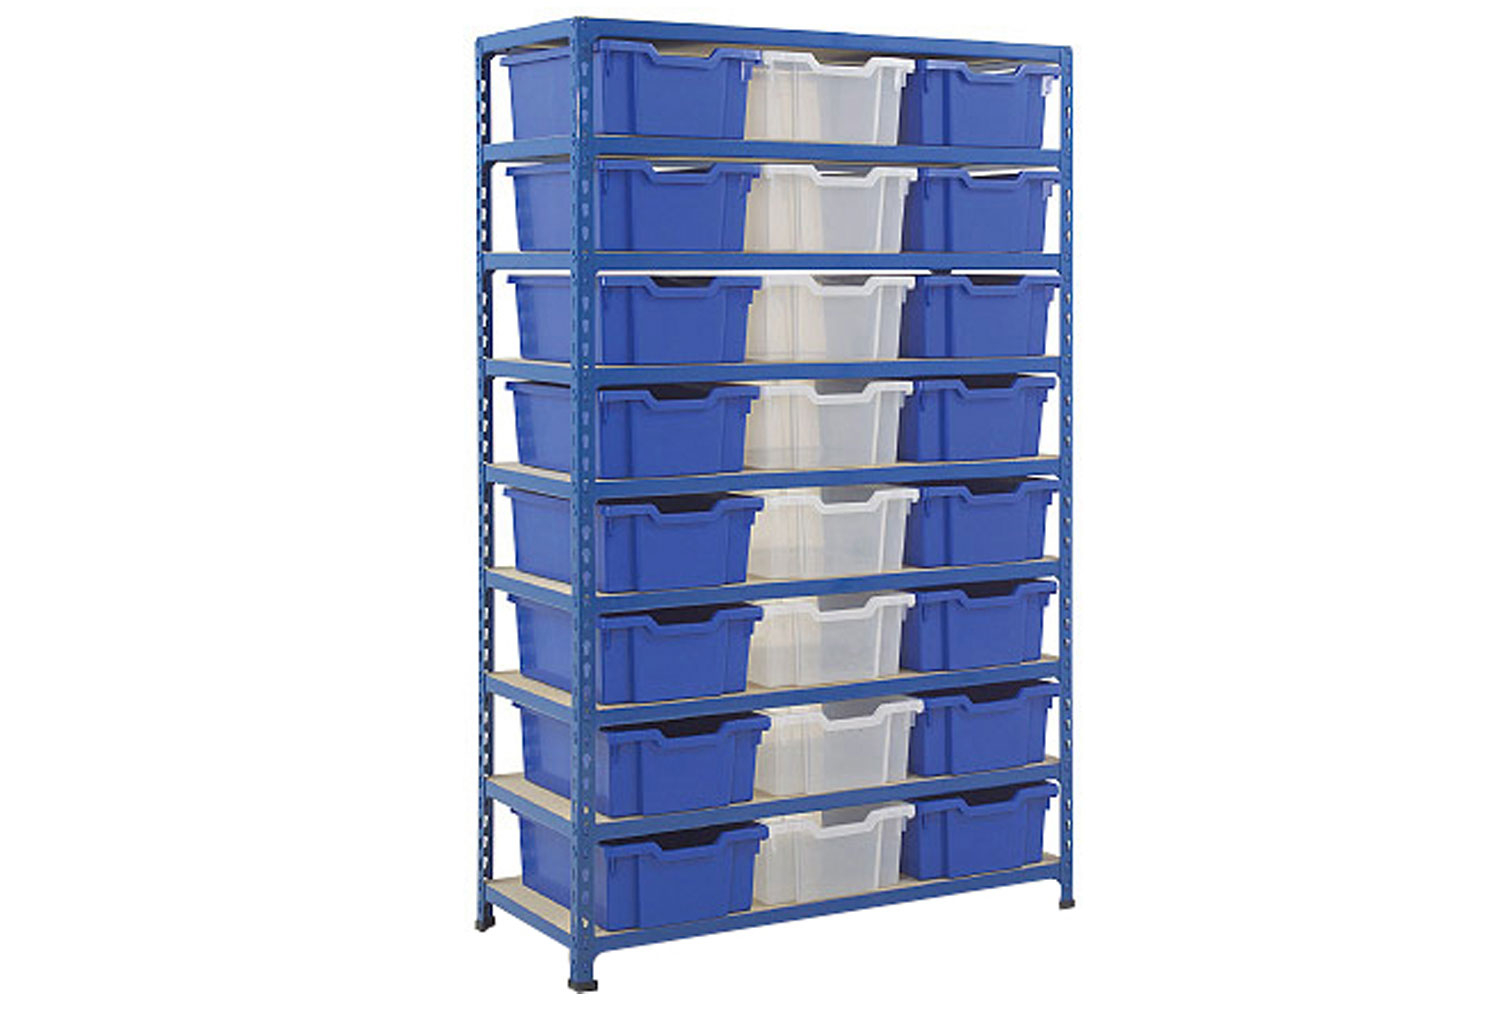 Rapid 2 Shelving Bay With 24 Deep Gratnells Trays, Blue Trays, Blue/Orange, Express Delivery